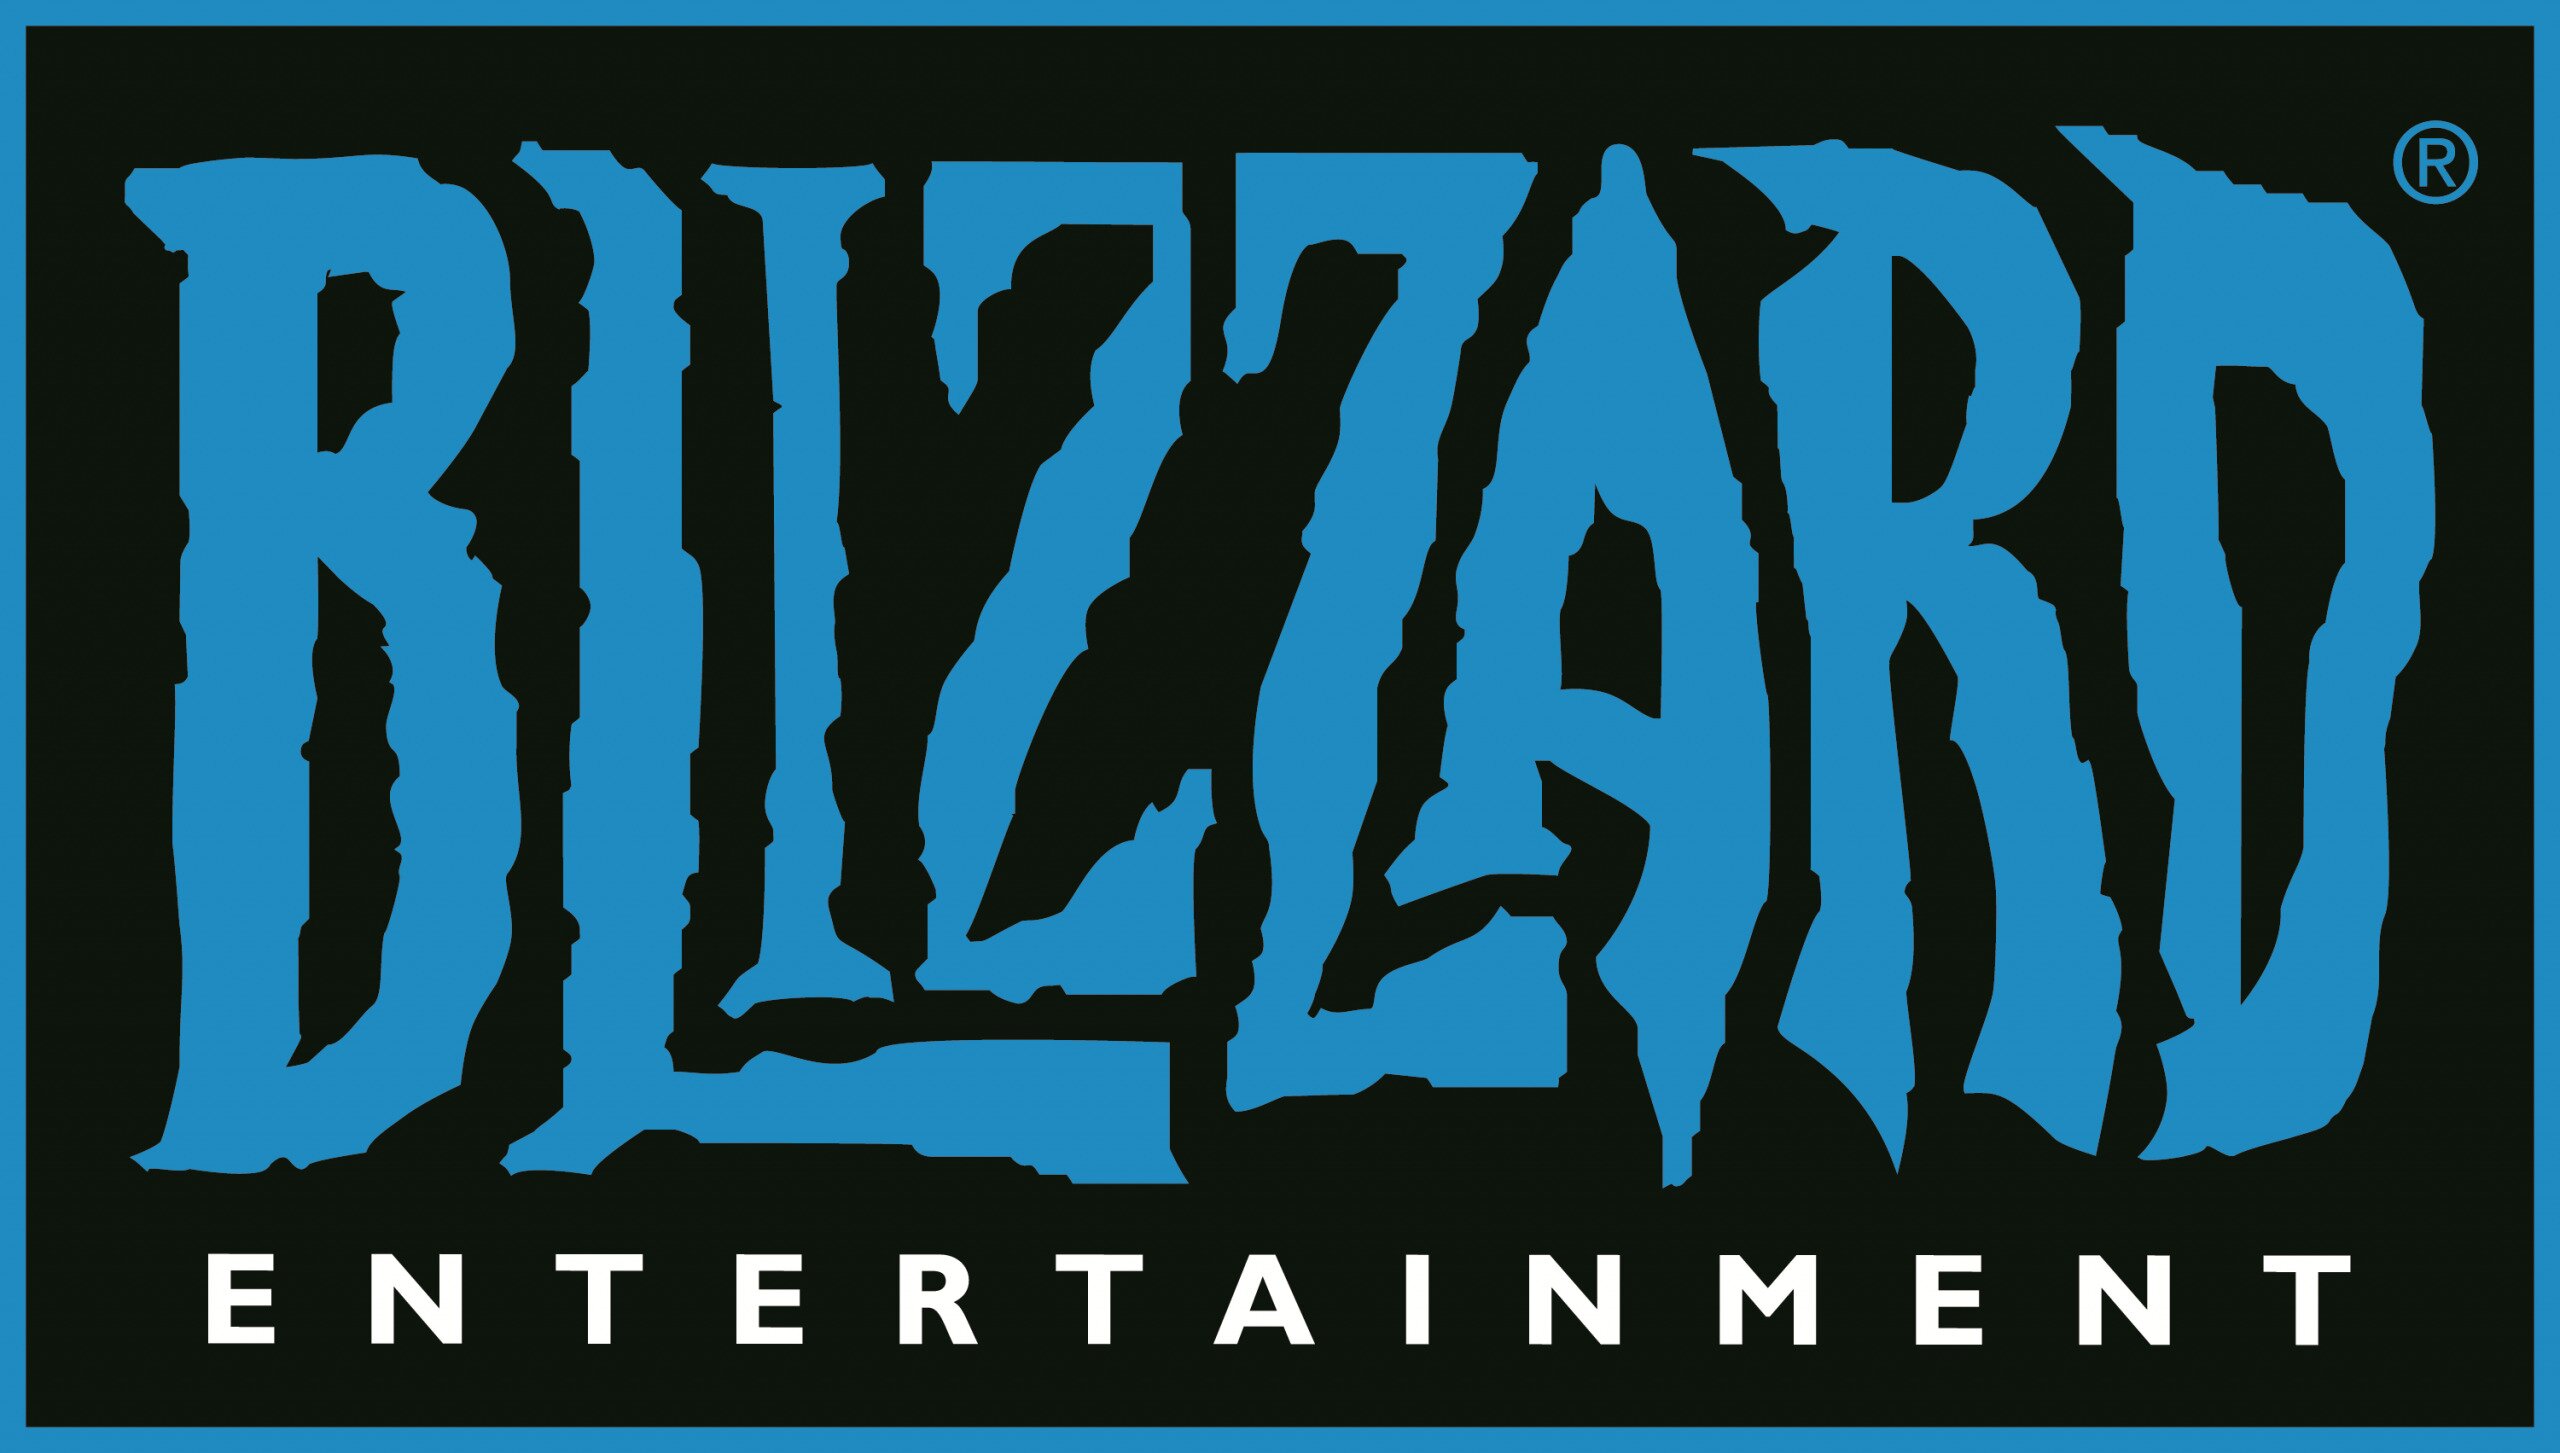 Allegations of an unhealthy work environment have been levied against one of the gaming industry's biggest developers, Blizzard Entertainment.